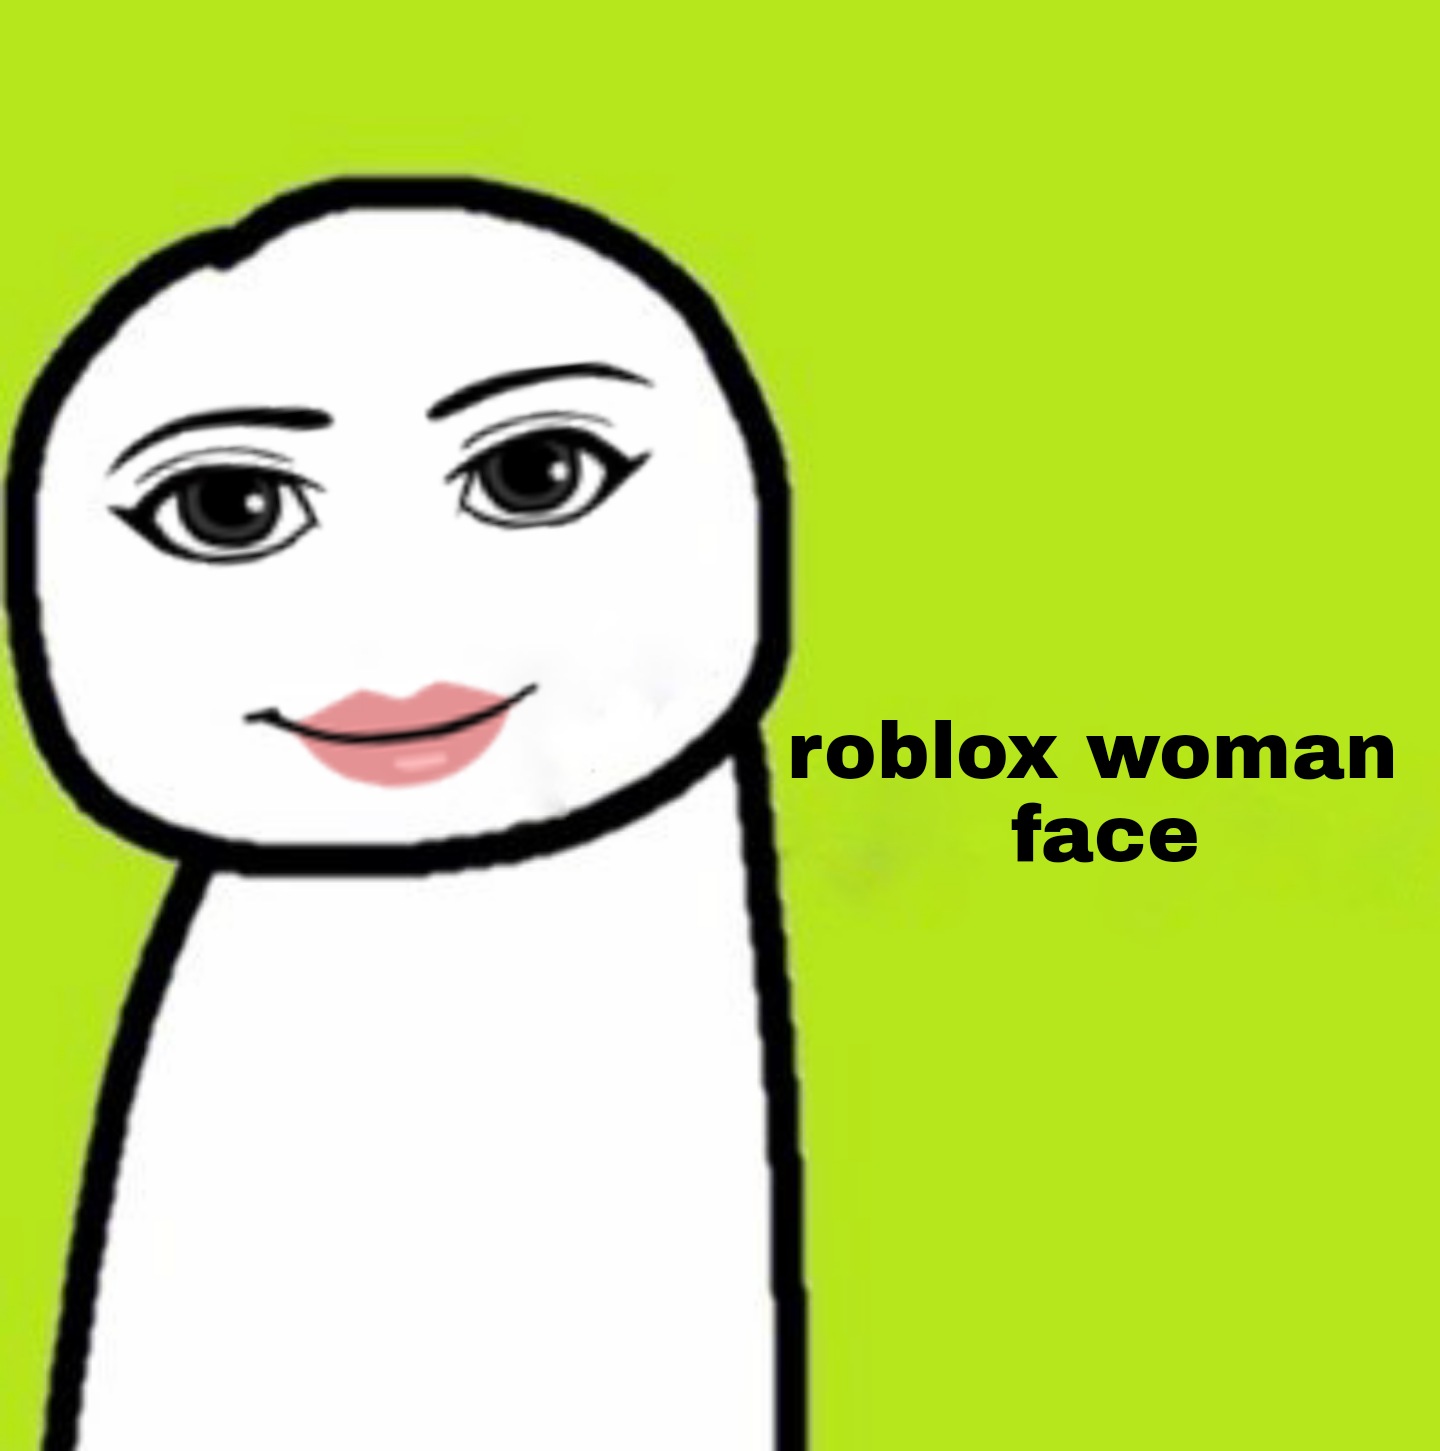 Roblox face woman😂😂  Roblox funny, Crazy funny pictures, Really funny  pictures